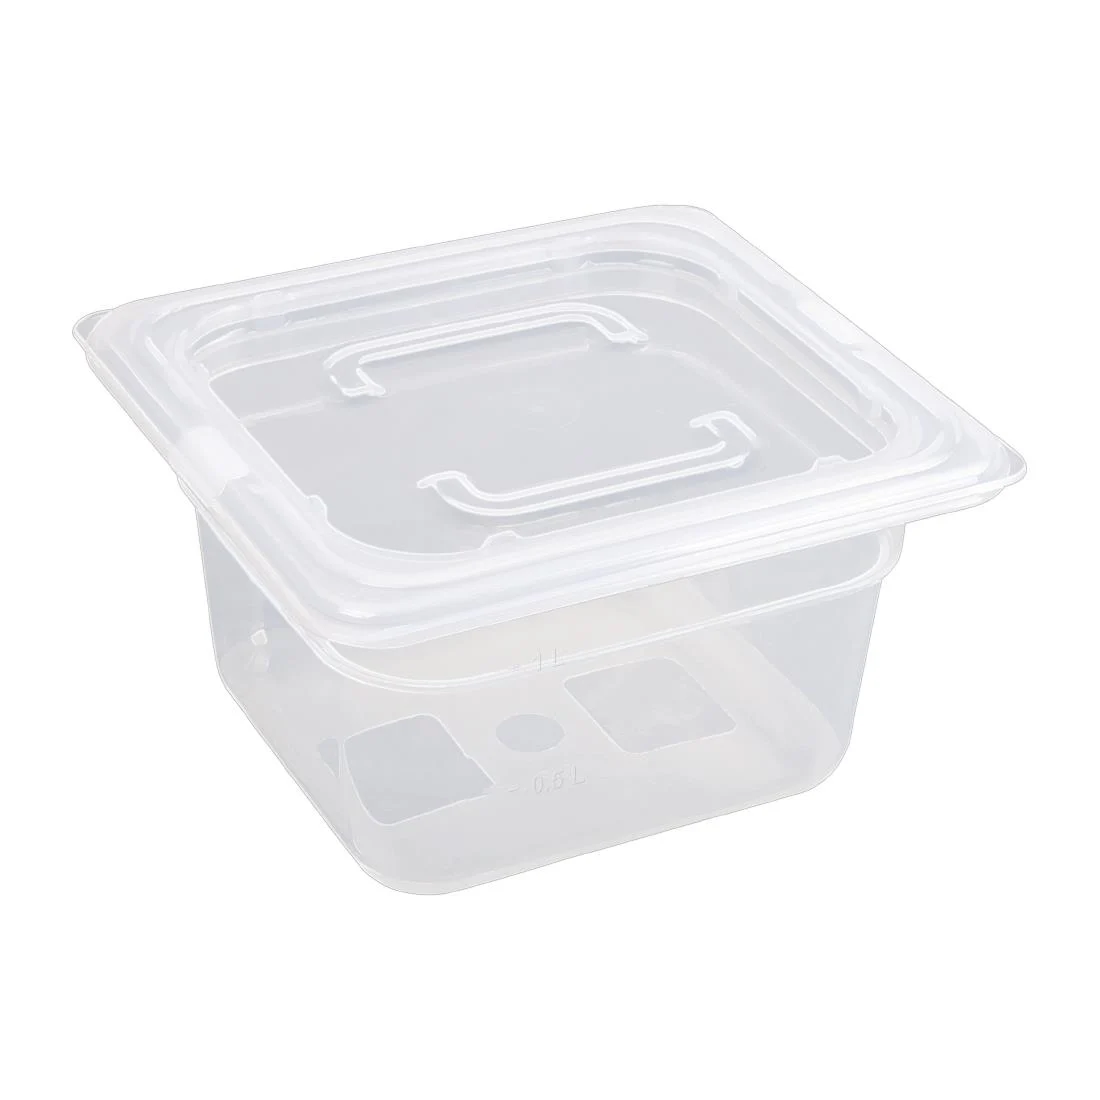 Image of Polypropylene 1/6 Gastronorm Containers with Lids